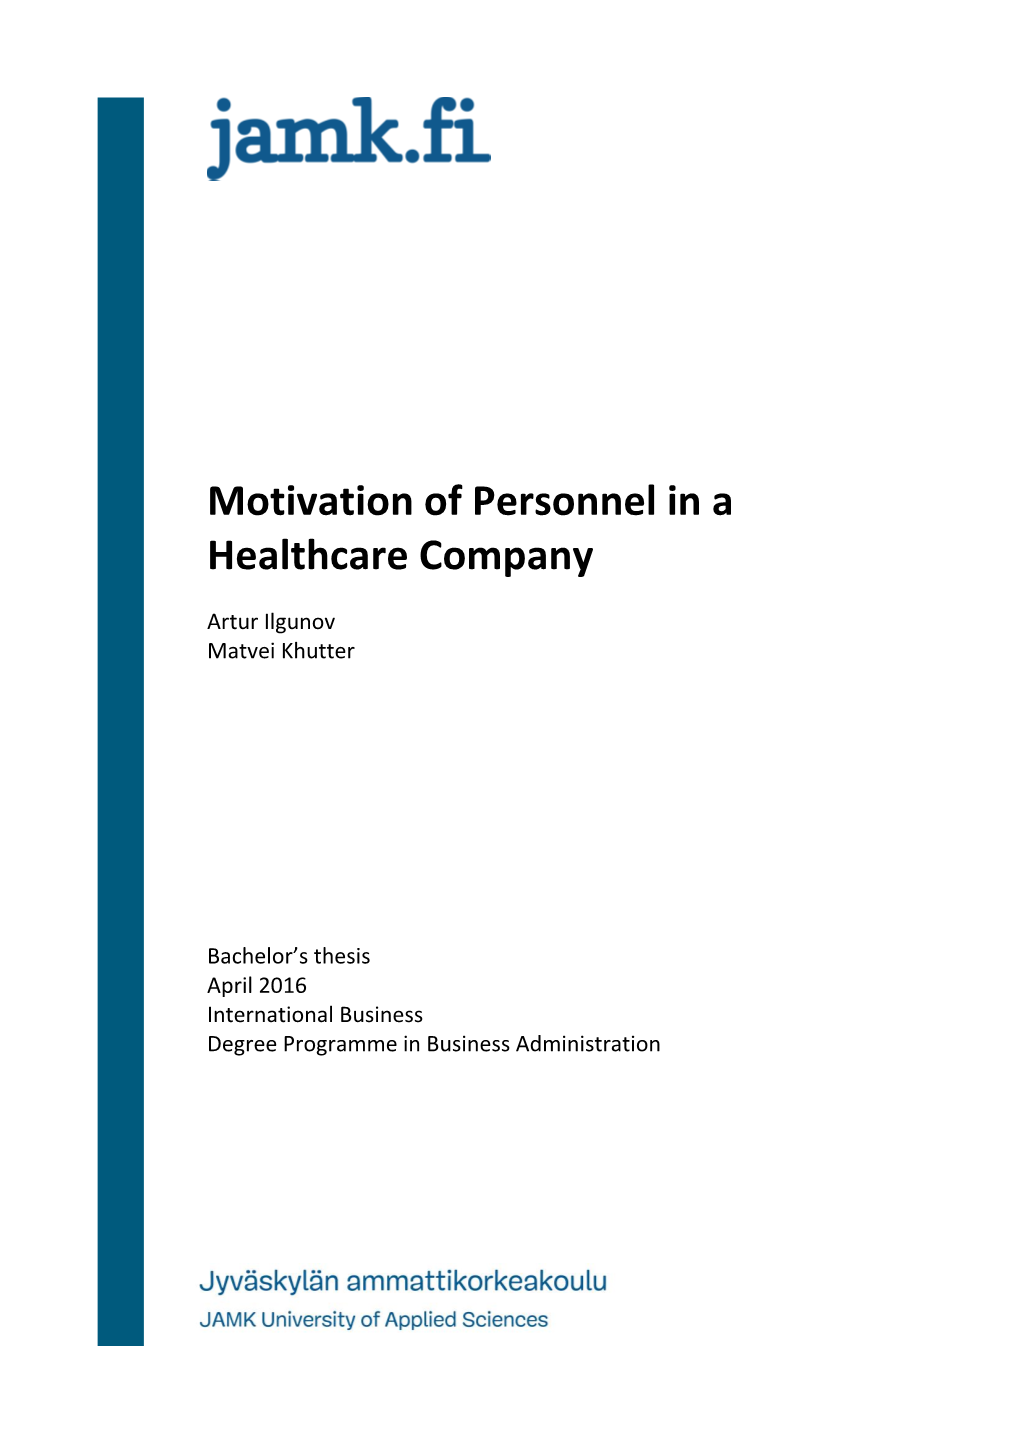 Motivation of Personnel in a Healthcare Company